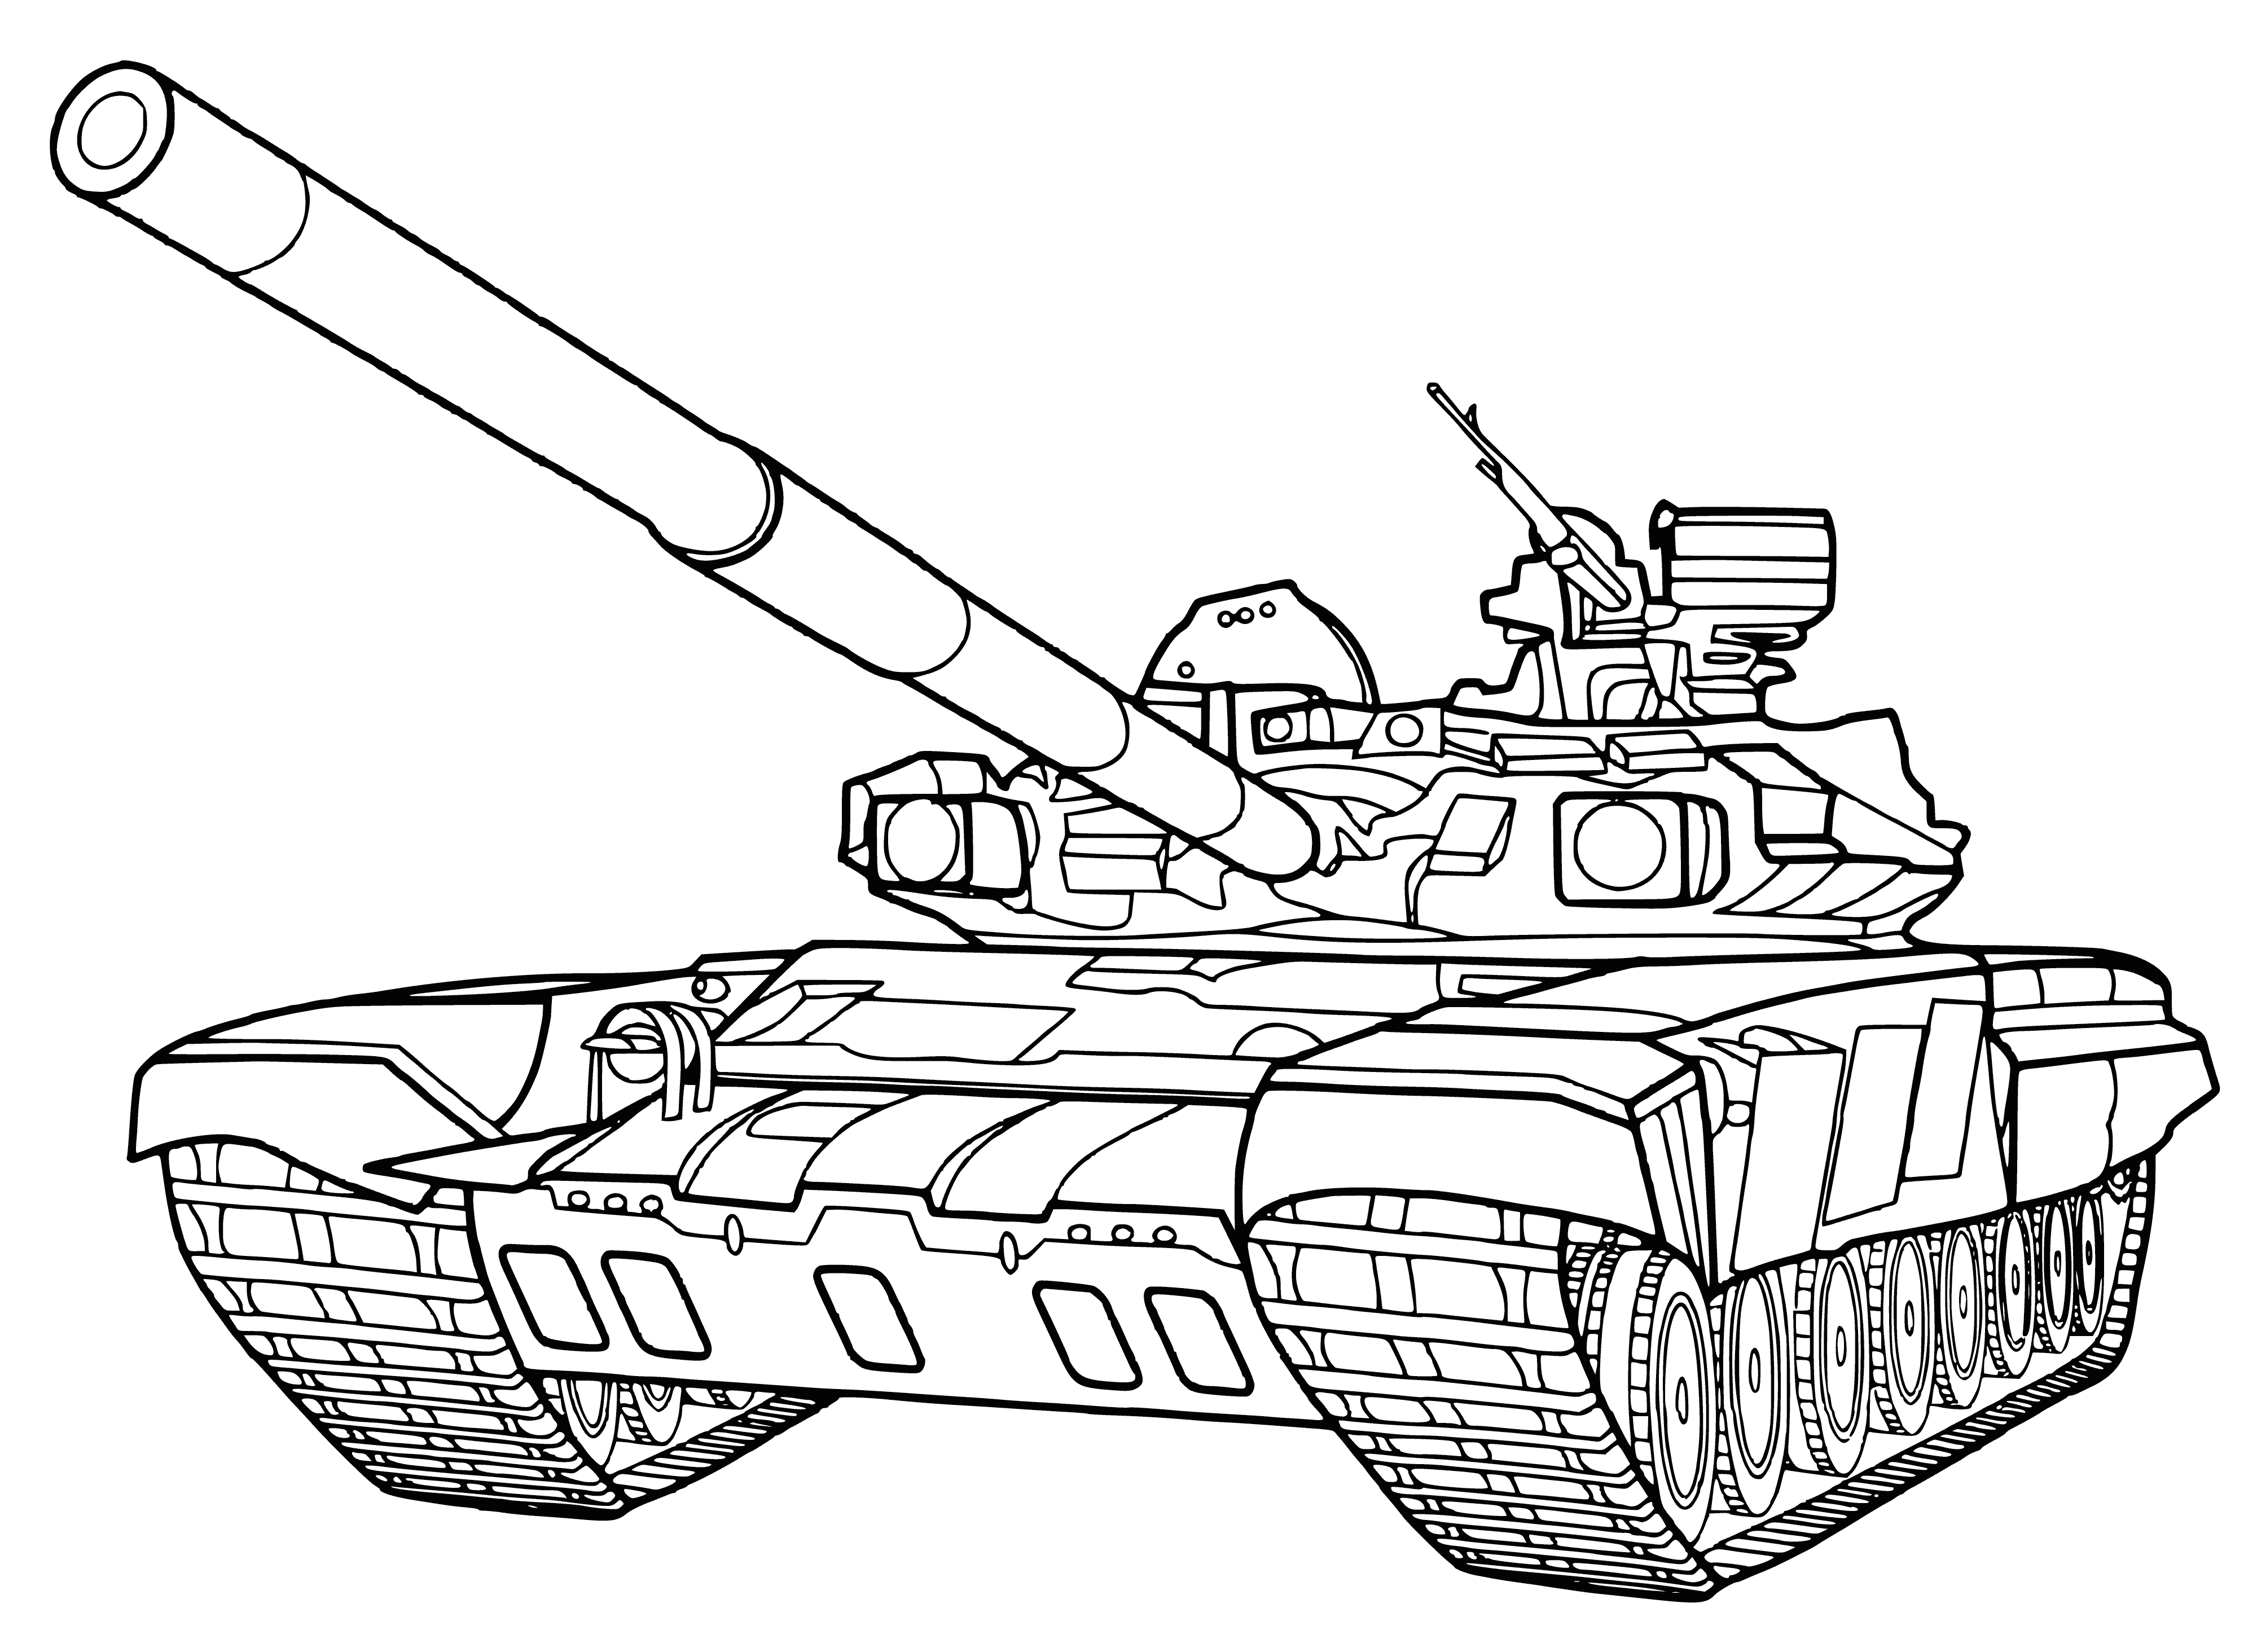 coloring page: Four tank-like vehicles driving on snowy road in coloring page; big guns on dark gray tanks, small dark gray car behind them.